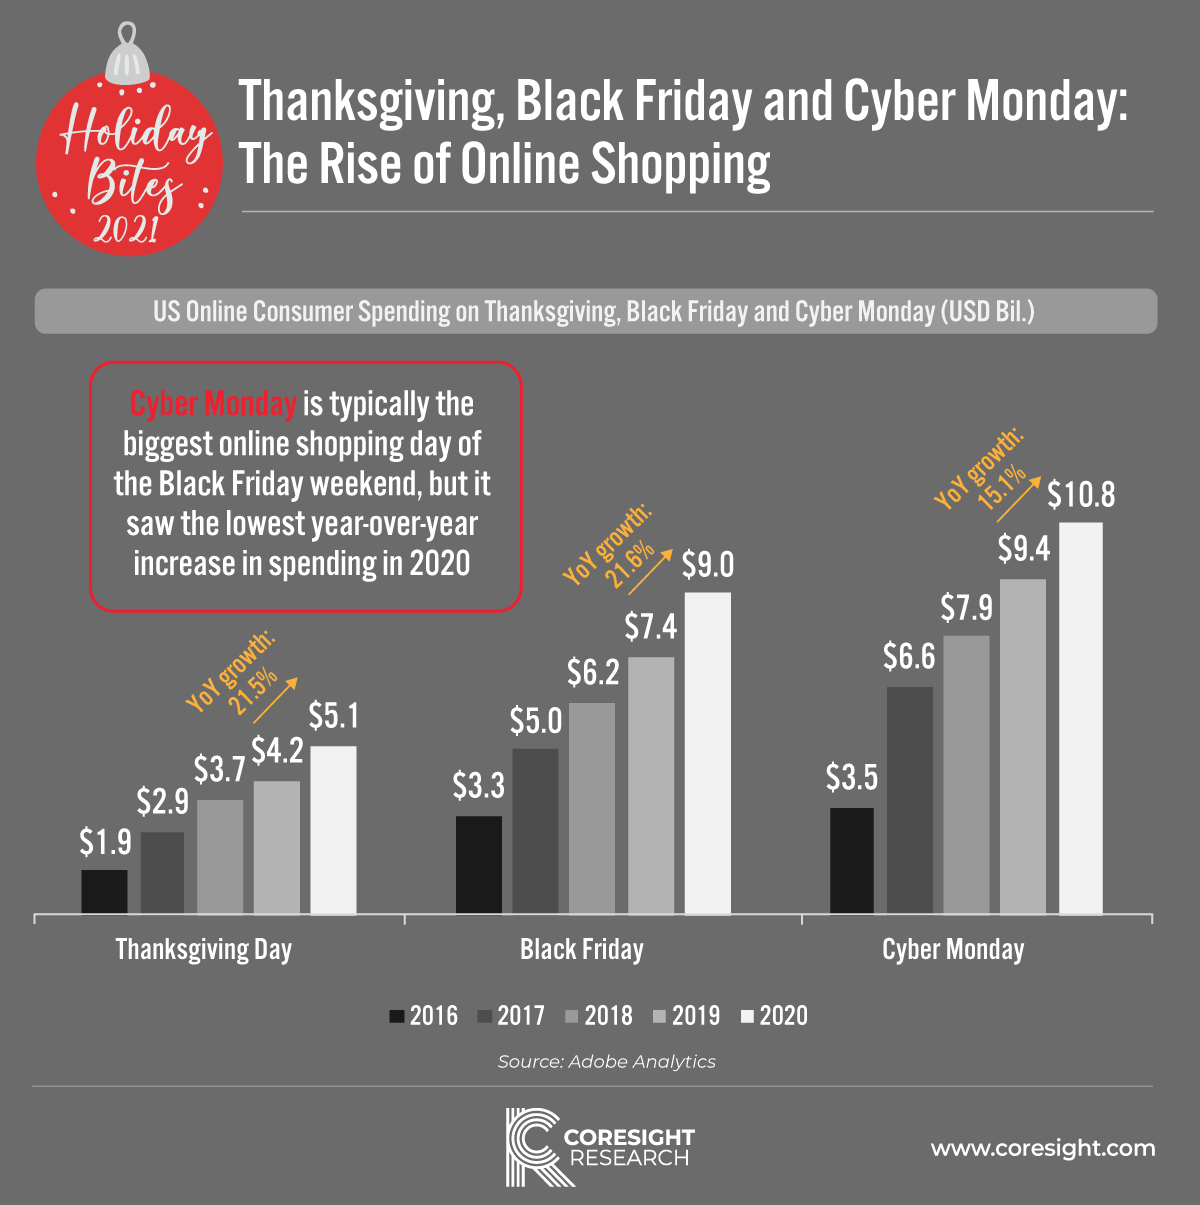 Thanksgiving, Black Friday and Cyber Monday: The Rise of Online Shopping 